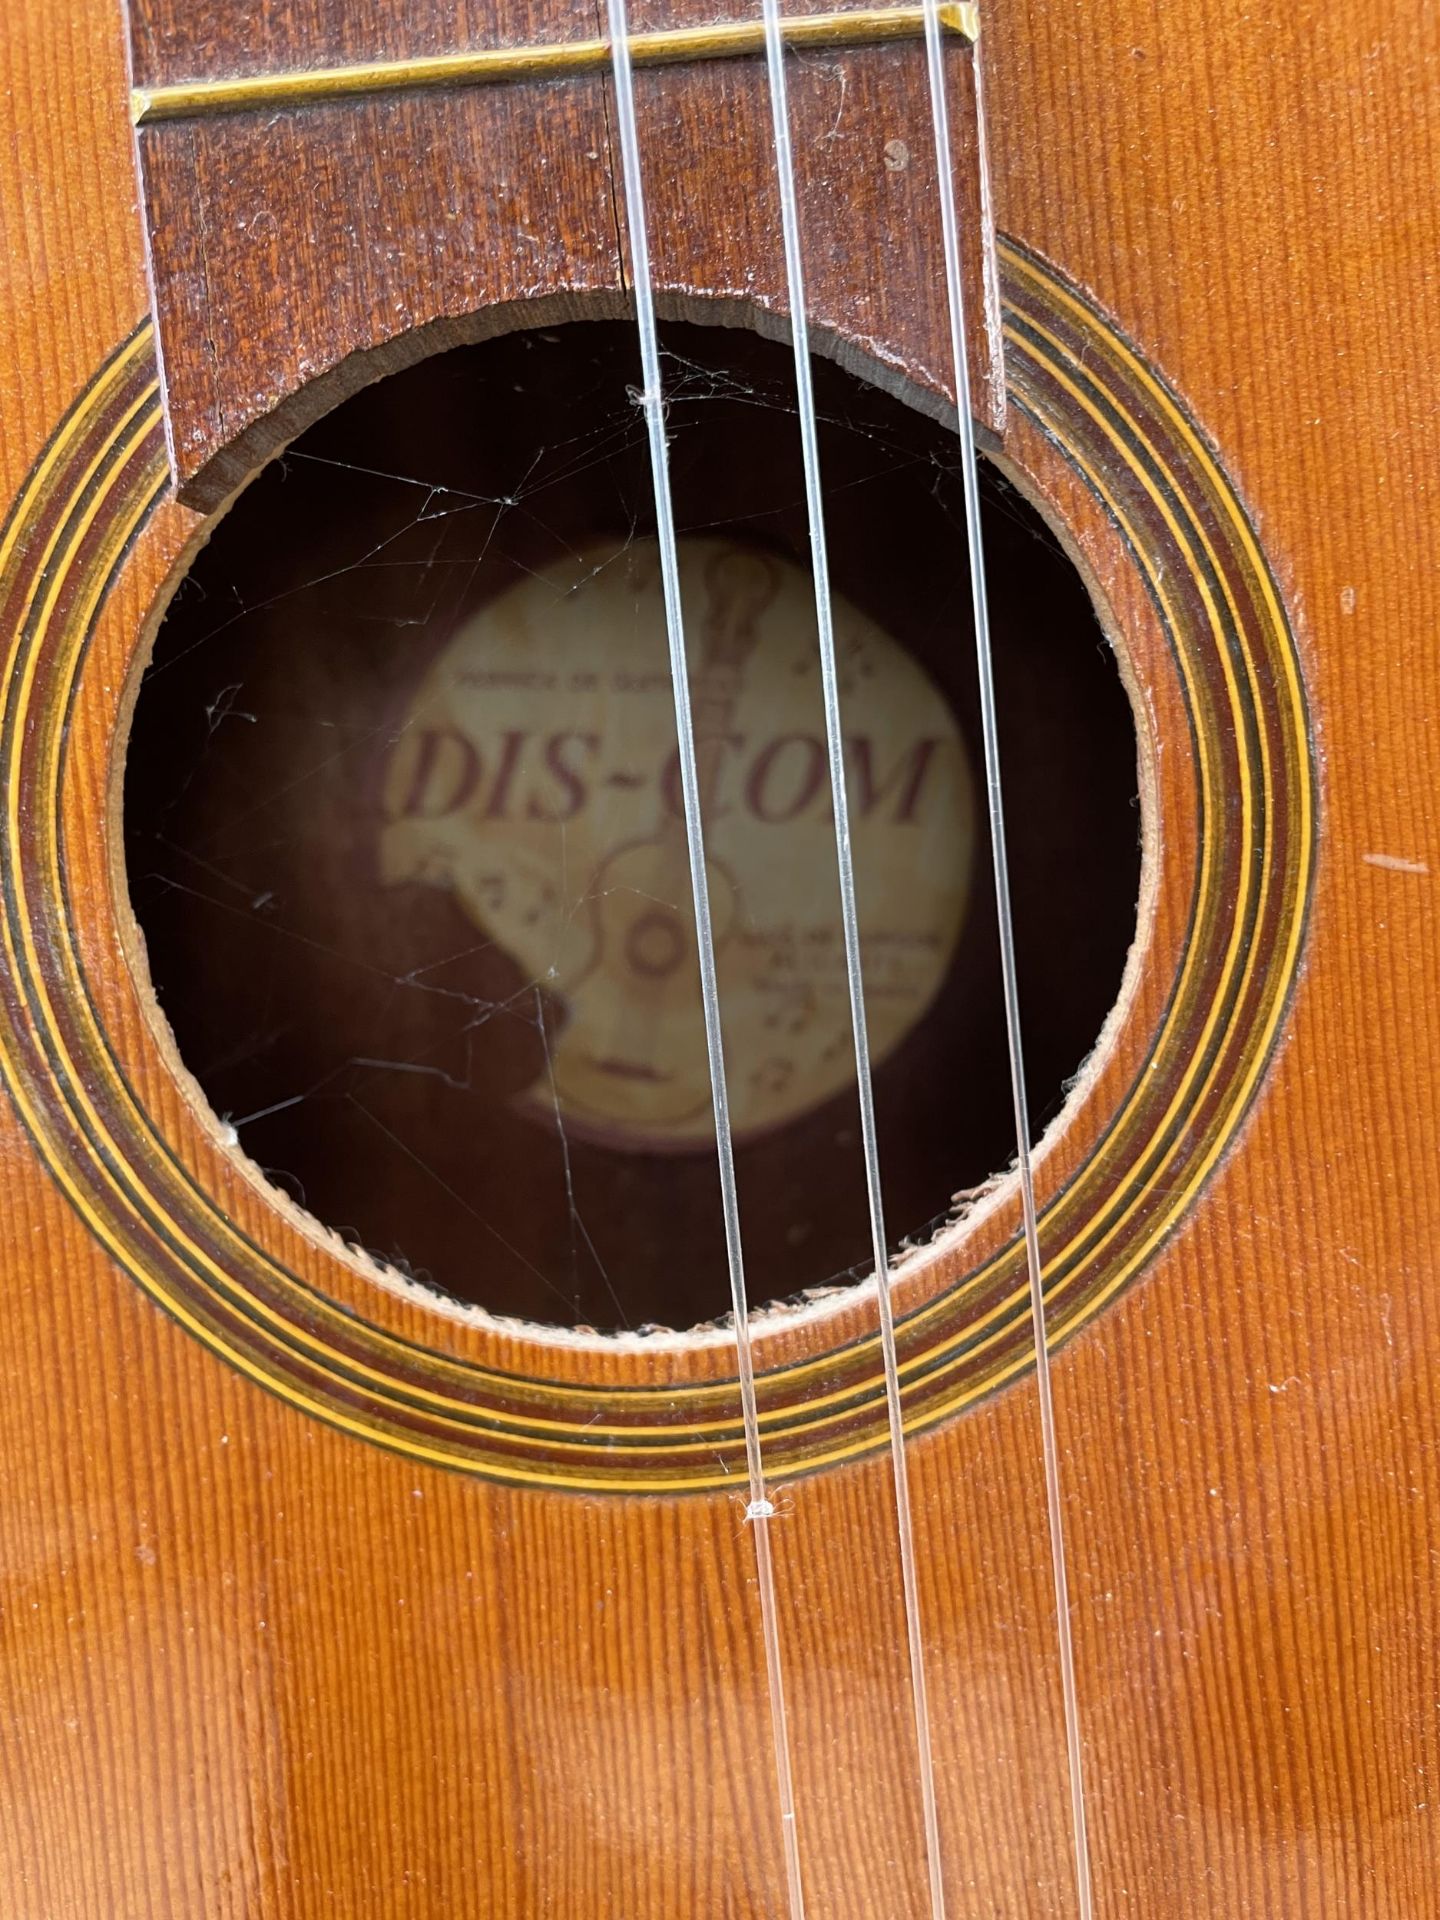 A DIS-COM MADE IN SPAIN ACOUSTIC GUITAR - Image 2 of 2